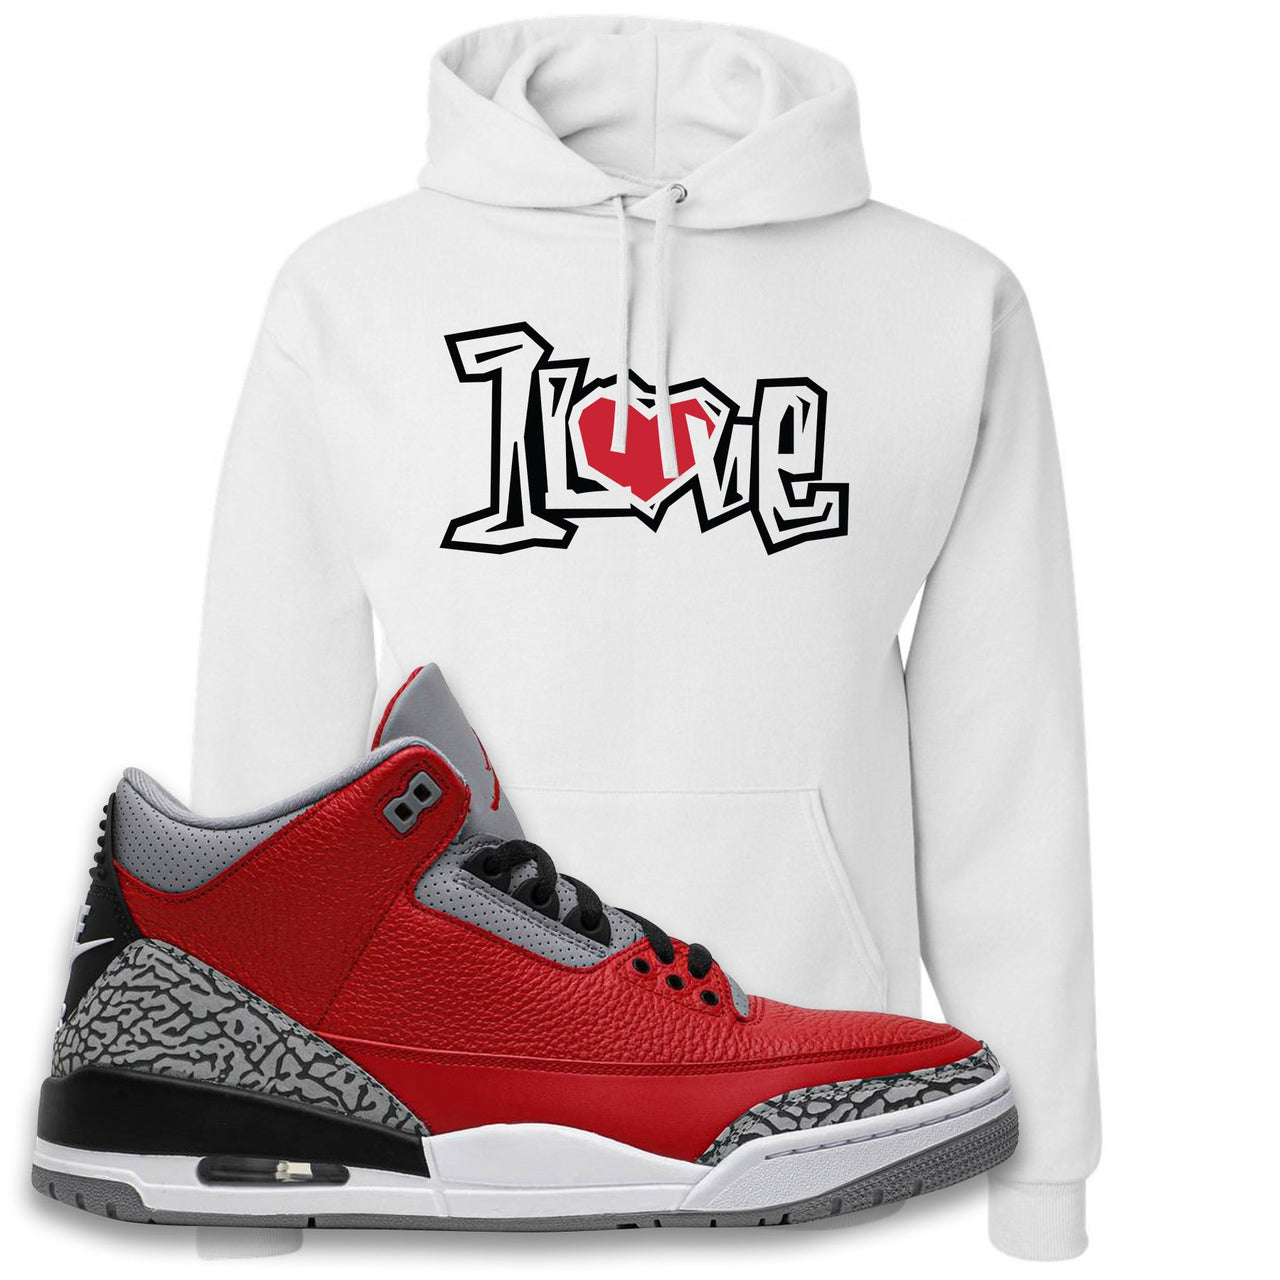 Jordan 3 Red Cement Chicago All-Star Sneaker White Pullover Hoodie | Hoodie to match Jordan 3 All Star Red Cement Shoes | 1 Love